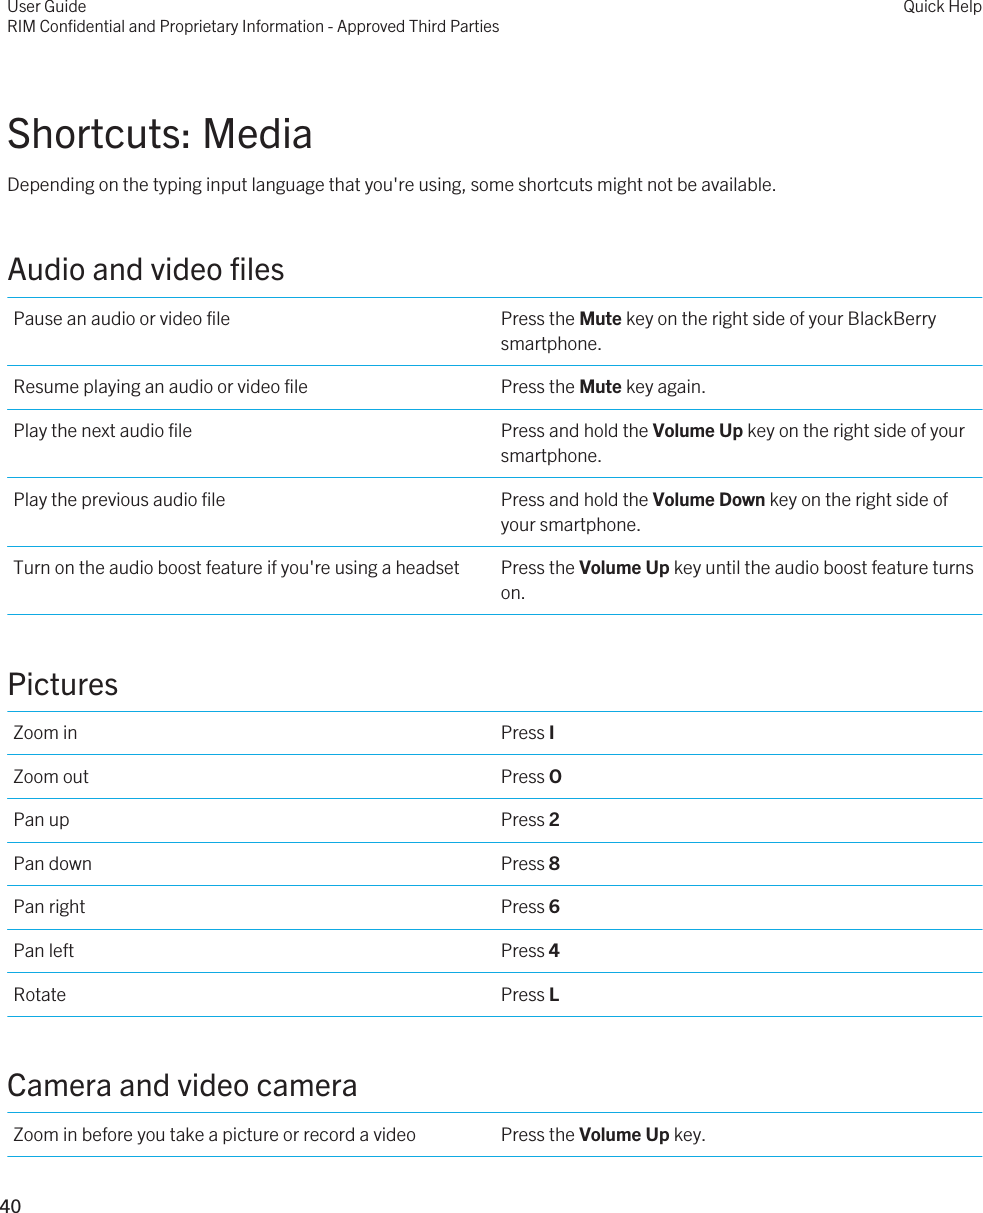 Shortcuts: MediaDepending on the typing input language that you&apos;re using, some shortcuts might not be available.Audio and video filesPause an audio or video file Press the Mute key on the right side of your BlackBerry smartphone.Resume playing an audio or video file Press the Mute key again.Play the next audio file Press and hold the Volume Up key on the right side of your smartphone.Play the previous audio file Press and hold the Volume Down key on the right side of your smartphone.Turn on the audio boost feature if you&apos;re using a headset Press the Volume Up key until the audio boost feature turns on.PicturesZoom in Press IZoom out Press OPan up Press 2Pan down Press 8Pan right Press 6Pan left Press 4Rotate Press LCamera and video cameraZoom in before you take a picture or record a video Press the Volume Up key.User GuideRIM Confidential and Proprietary Information - Approved Third PartiesQuick Help40 